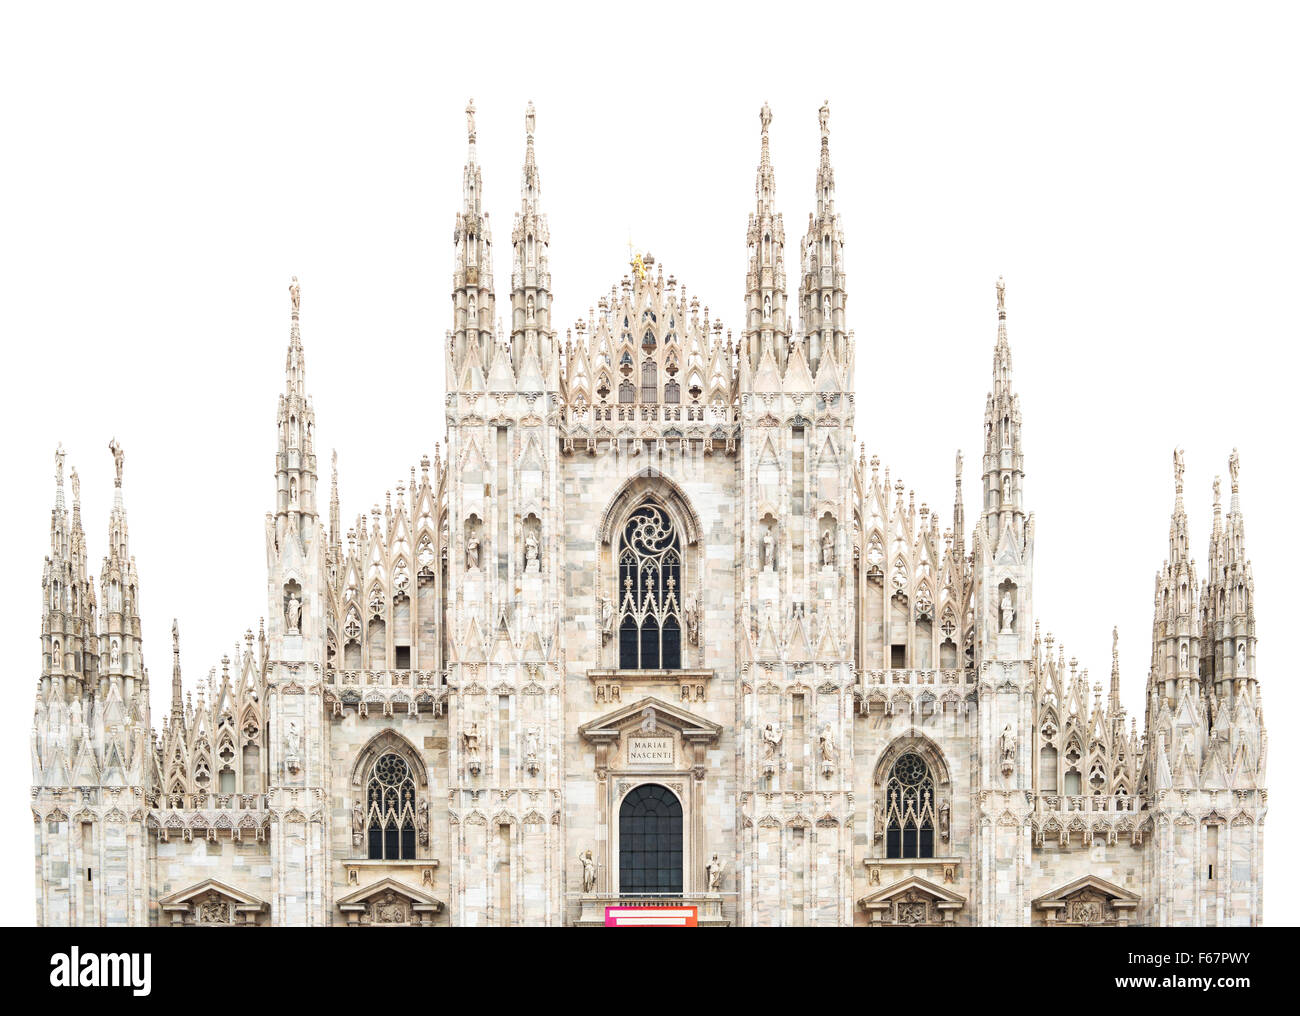 Milan Gothic Cathedral Dome Landmark upper front side isolated under a white sky. Italy, Europe. Stock Photo